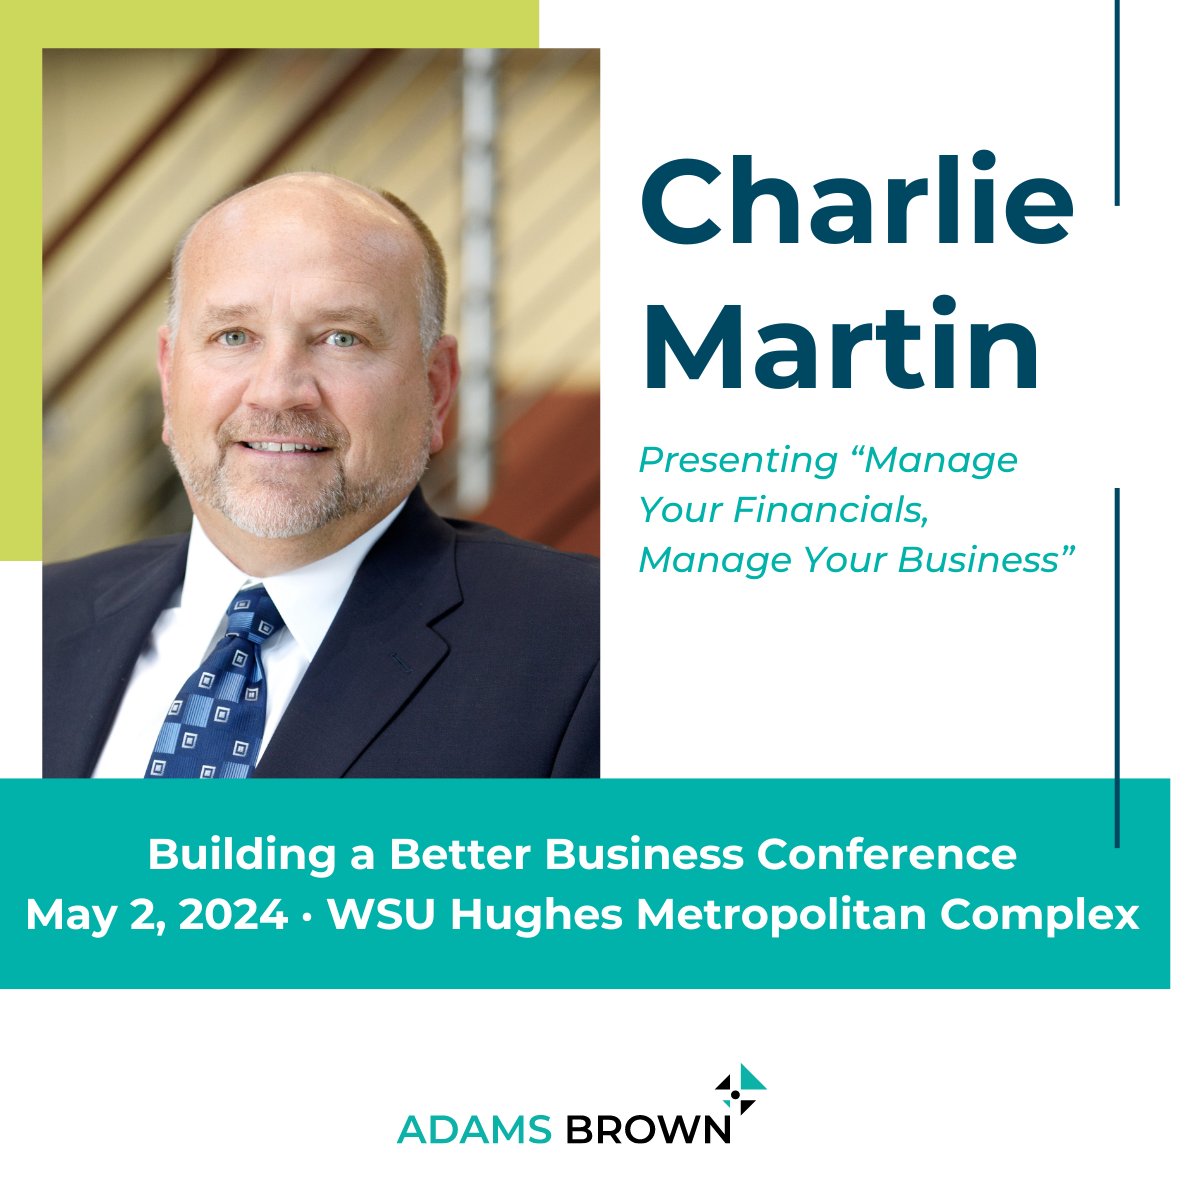 Register for the Building a Better Business Conference where Charlie Martin will be presenting on Thursday, May 2! hubs.la/Q02vBNY10 #WSU #WichitaState #SBA #NationalSmallBusinessWeek #AdamsBrown